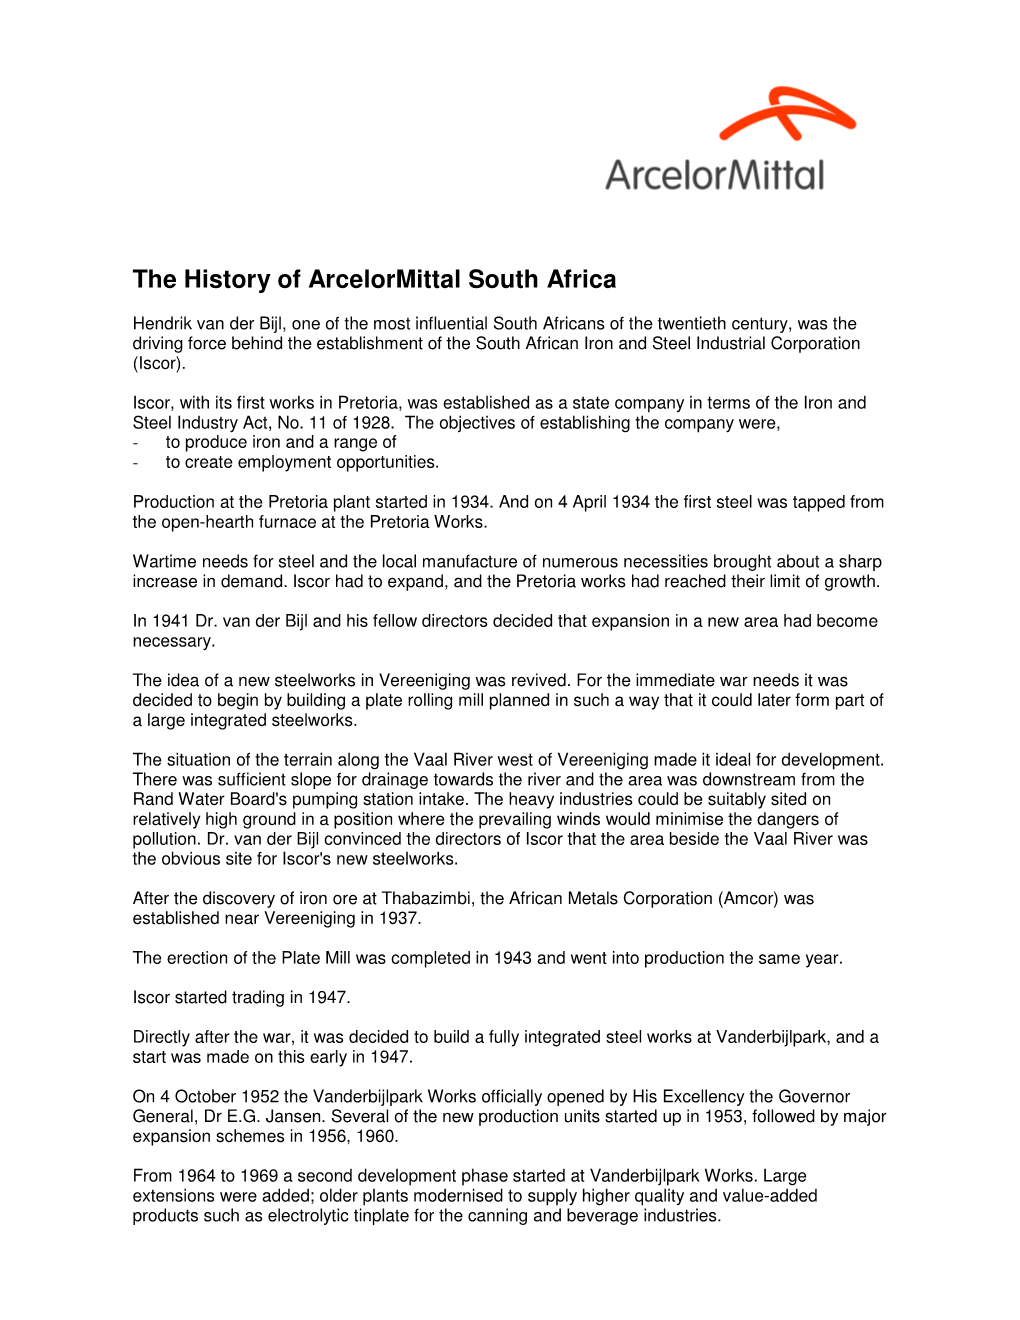 The History of Arcelormittal South Africa